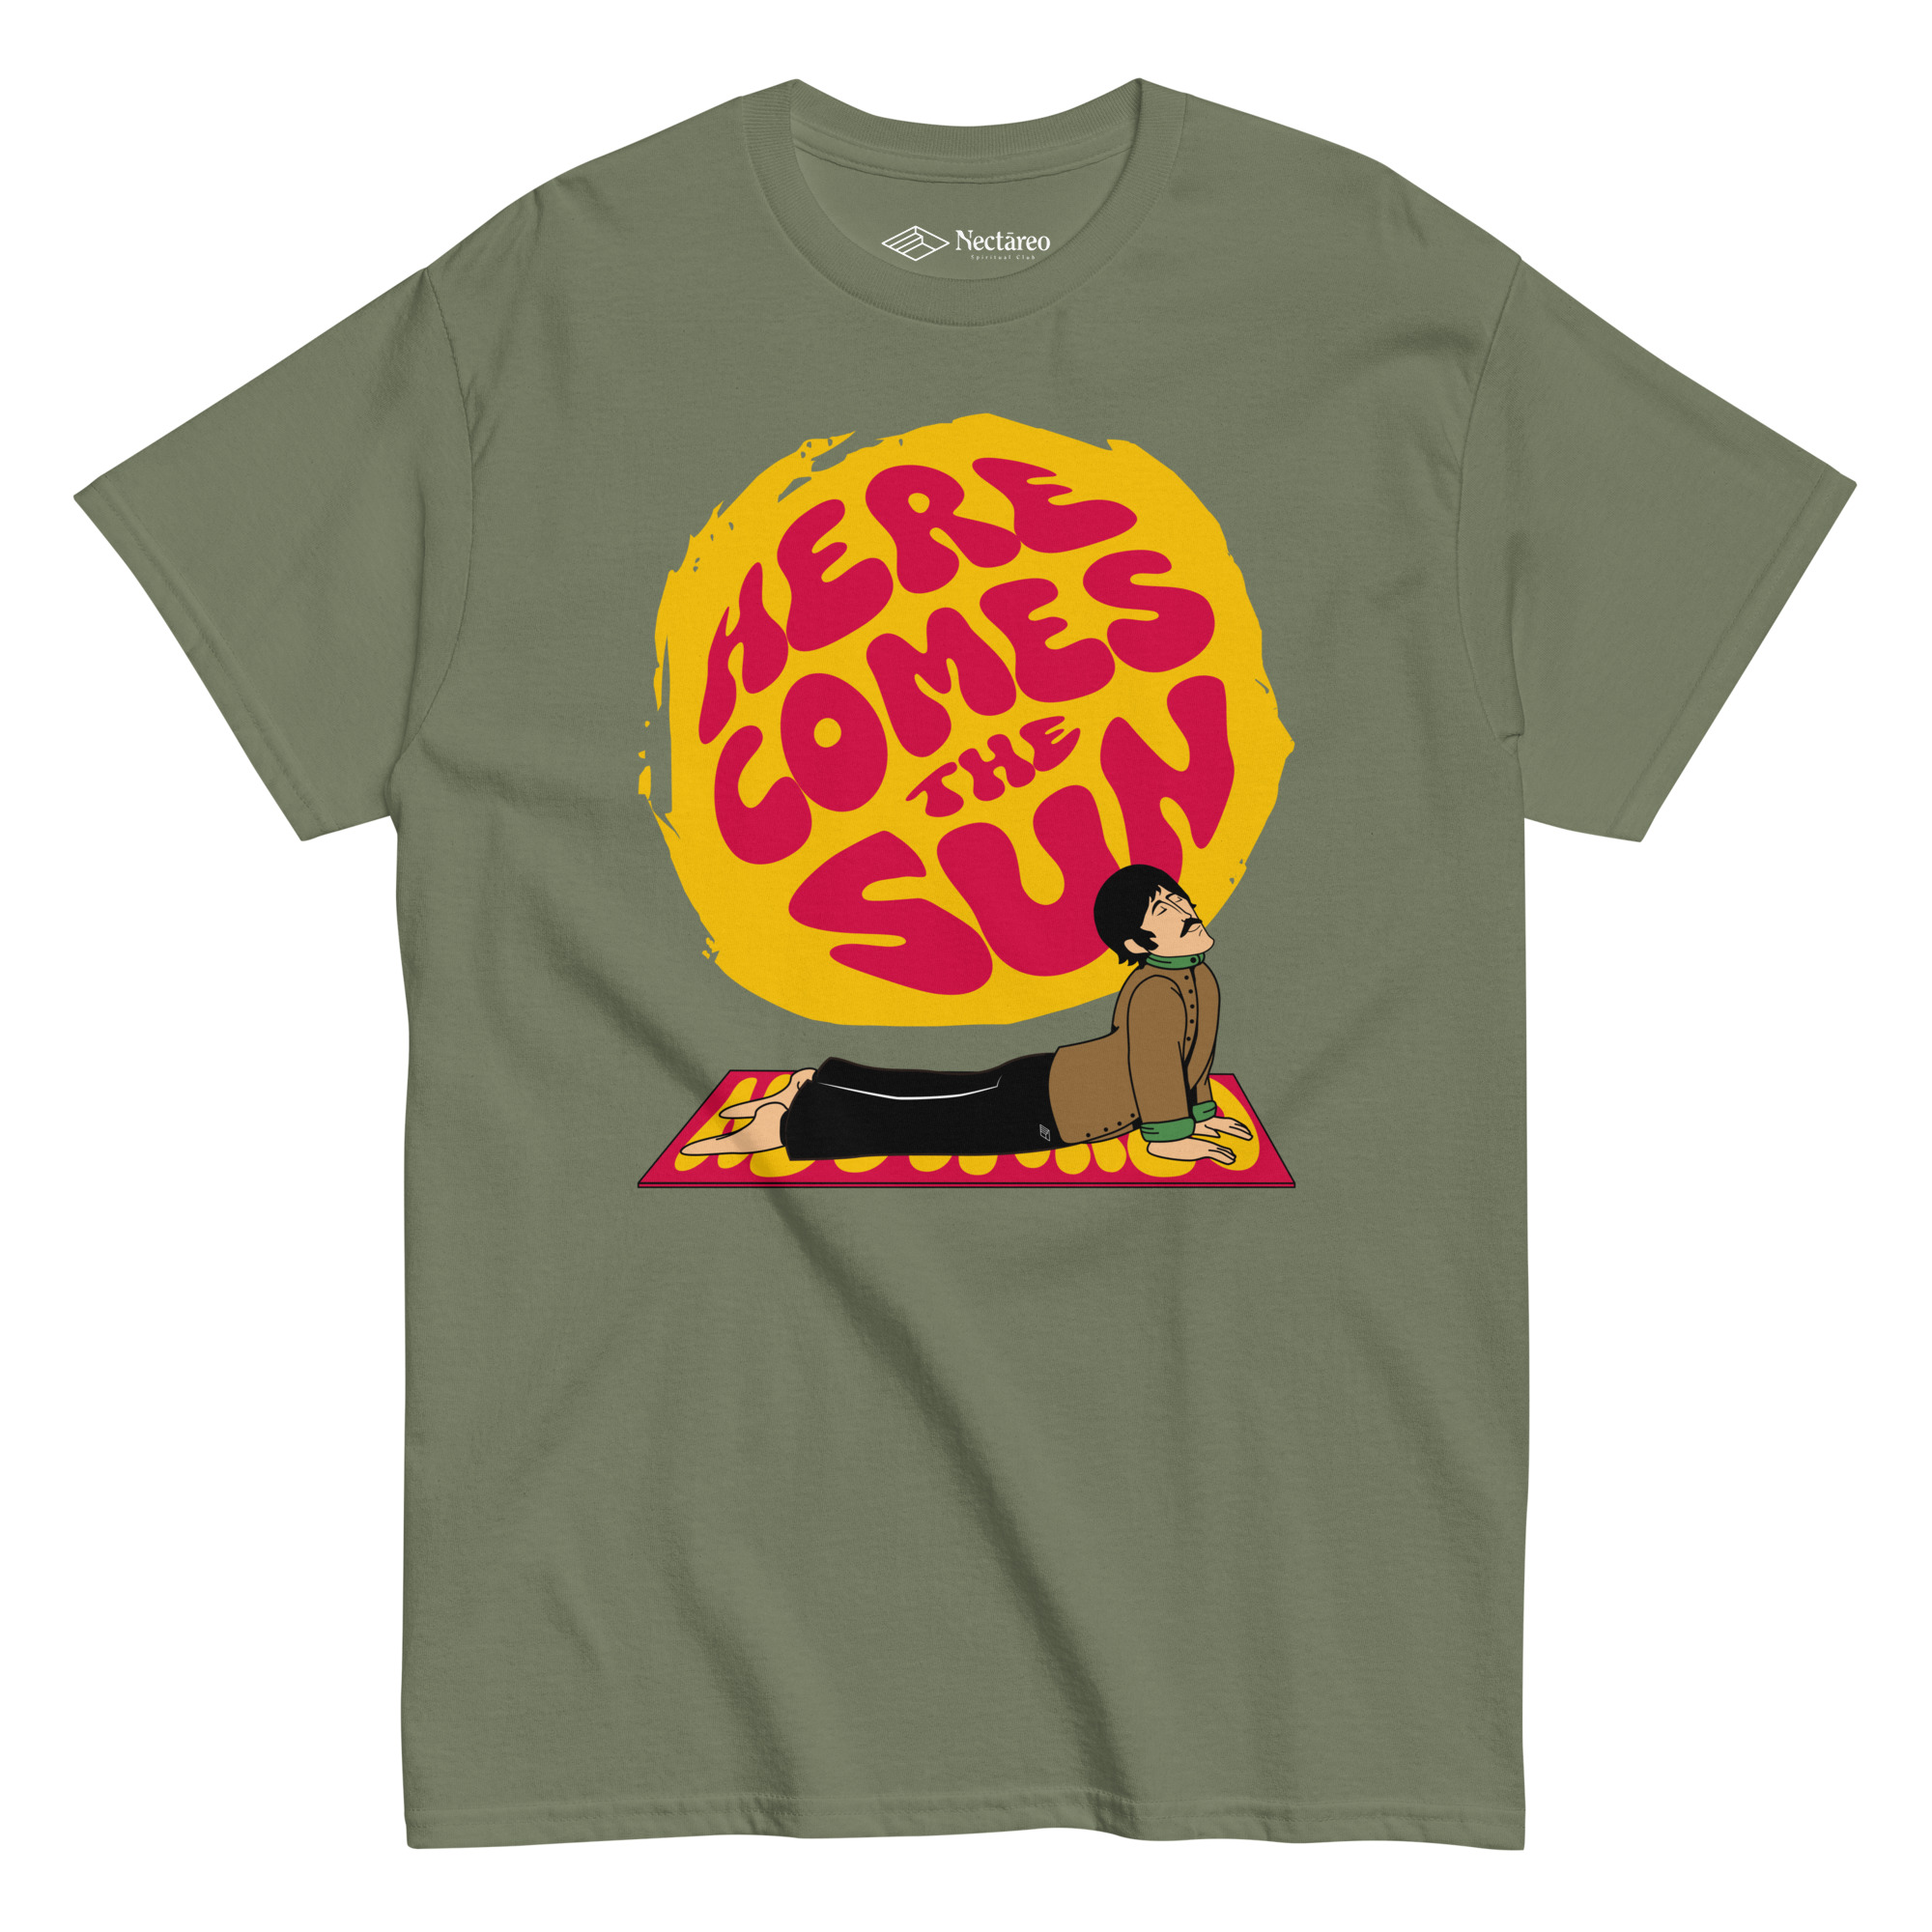 ‘Here Comes The Sun’ Unisex Shirt